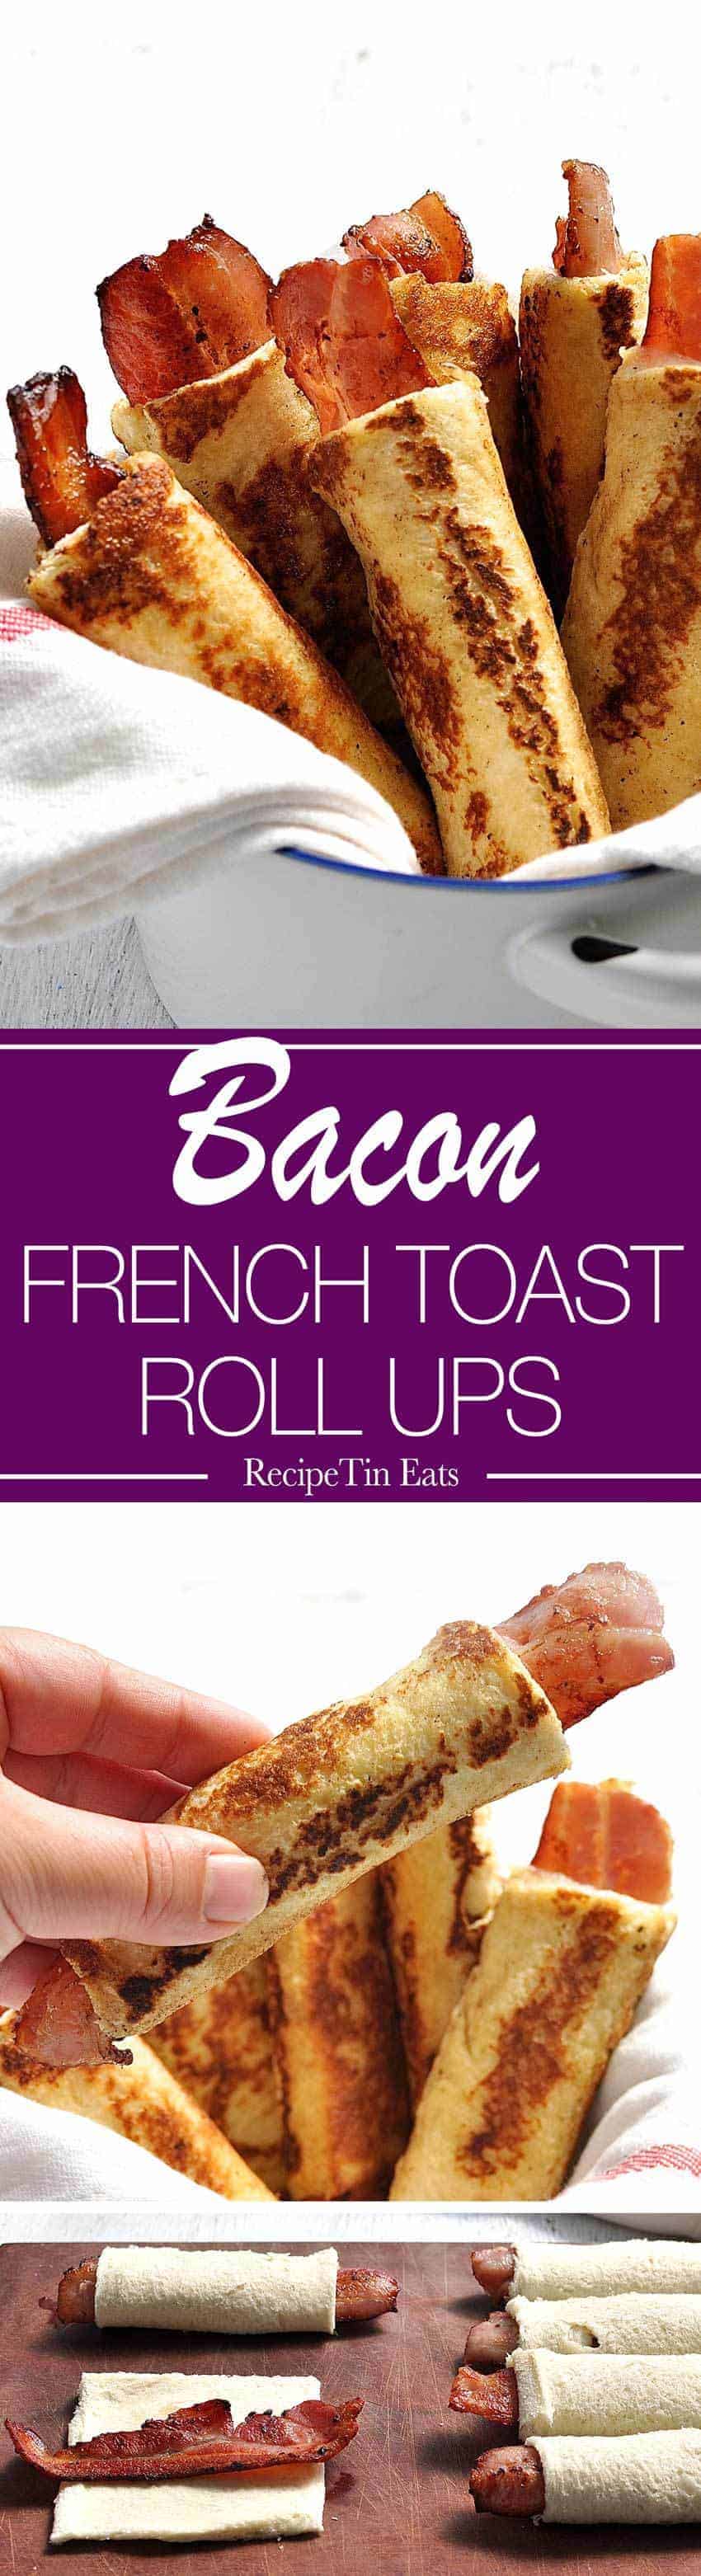 BACON French Toast Roll Ups | I wish I had never discovered this!!! It's ridiculously addictive!!!